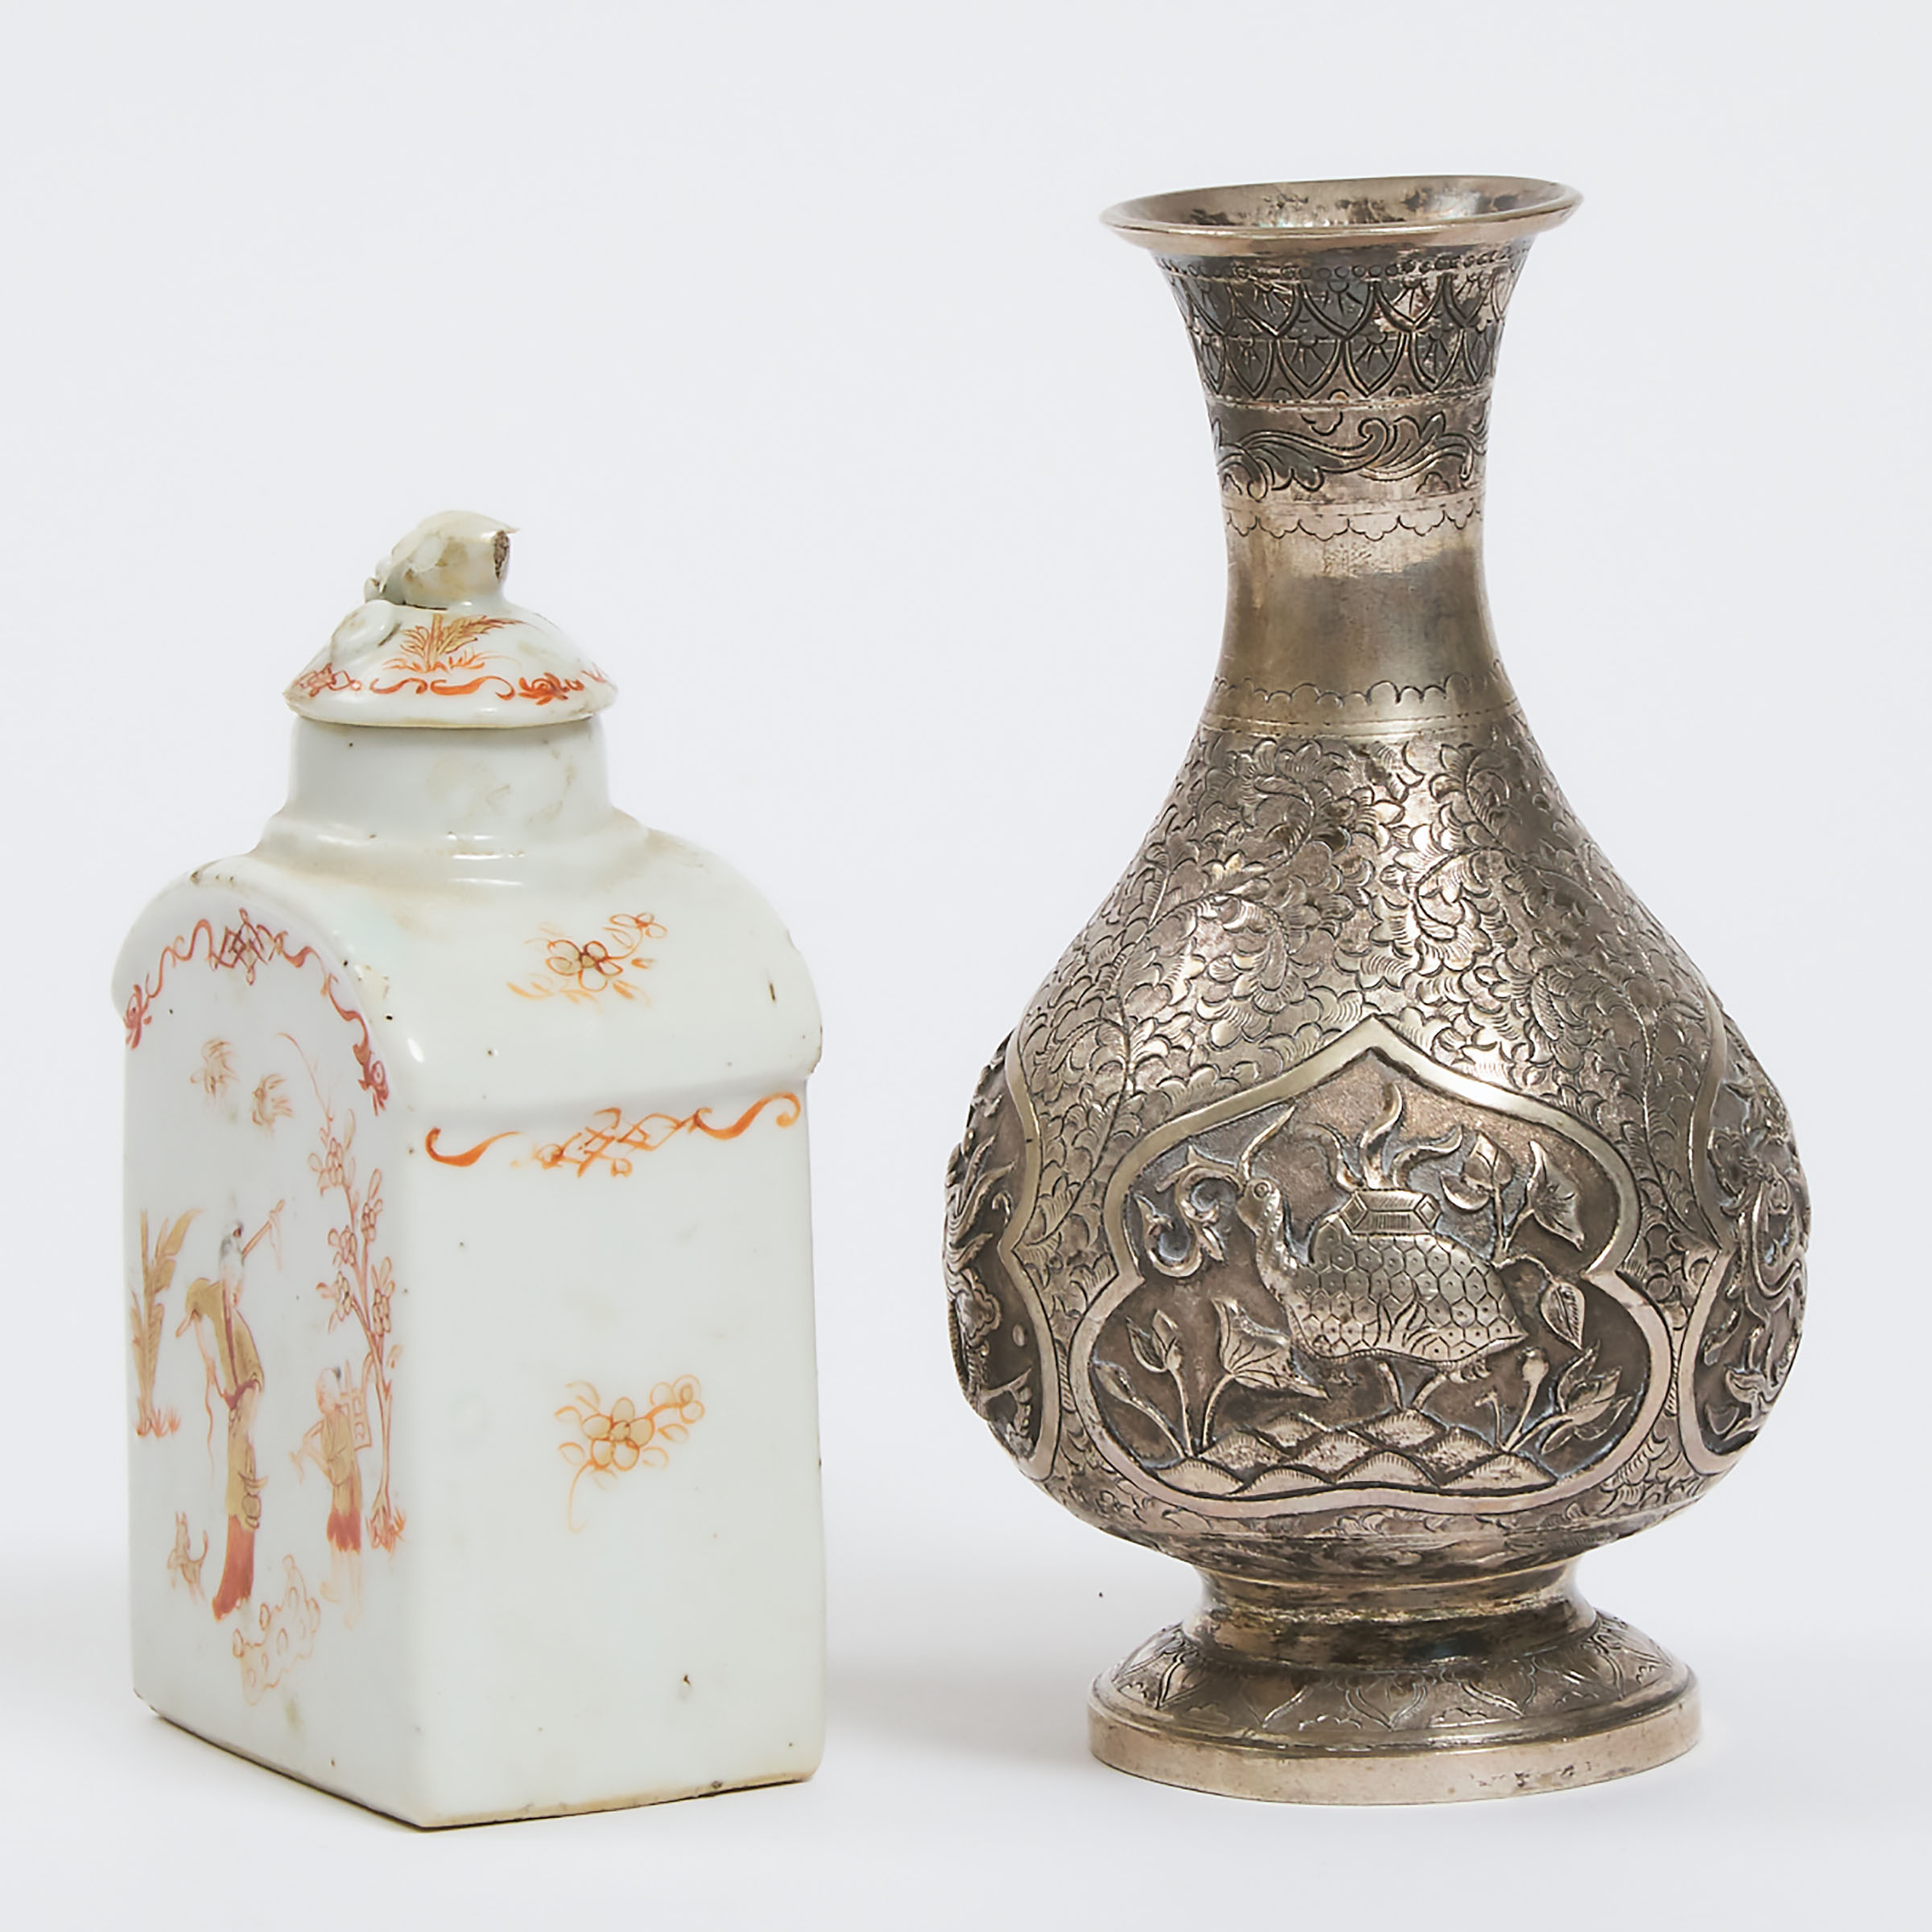 An Iron Red and Gilt Decorated Tea Caddy, Together With a Chinese Silver Vase, 18th Century and Later